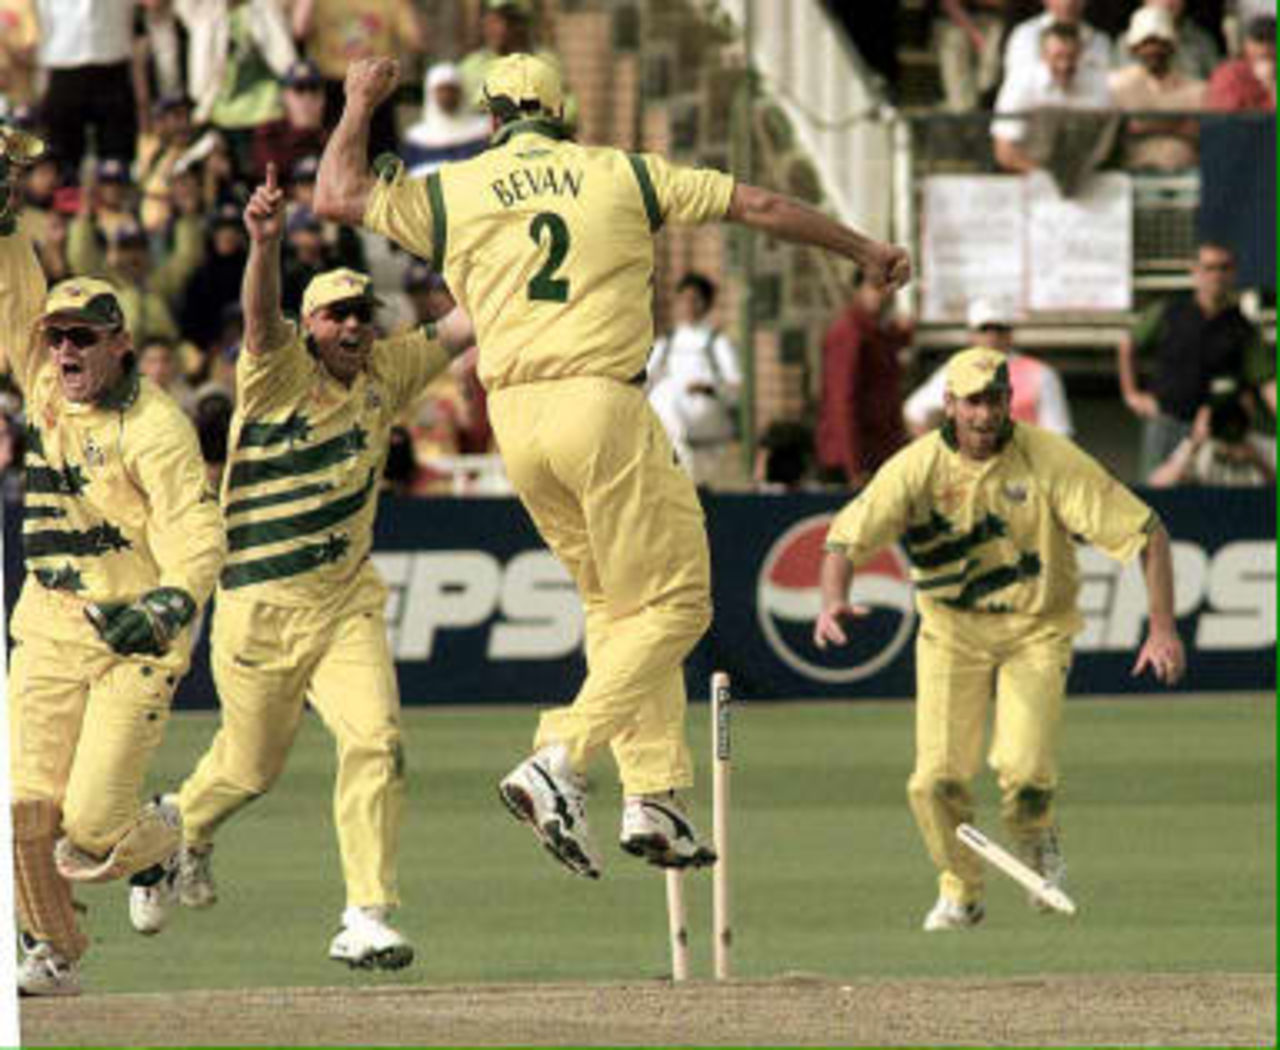 The Australian team celebrate their win over South Africa in the Cricket World cup at Edgbaston, Birmingham, 17 June 1999.